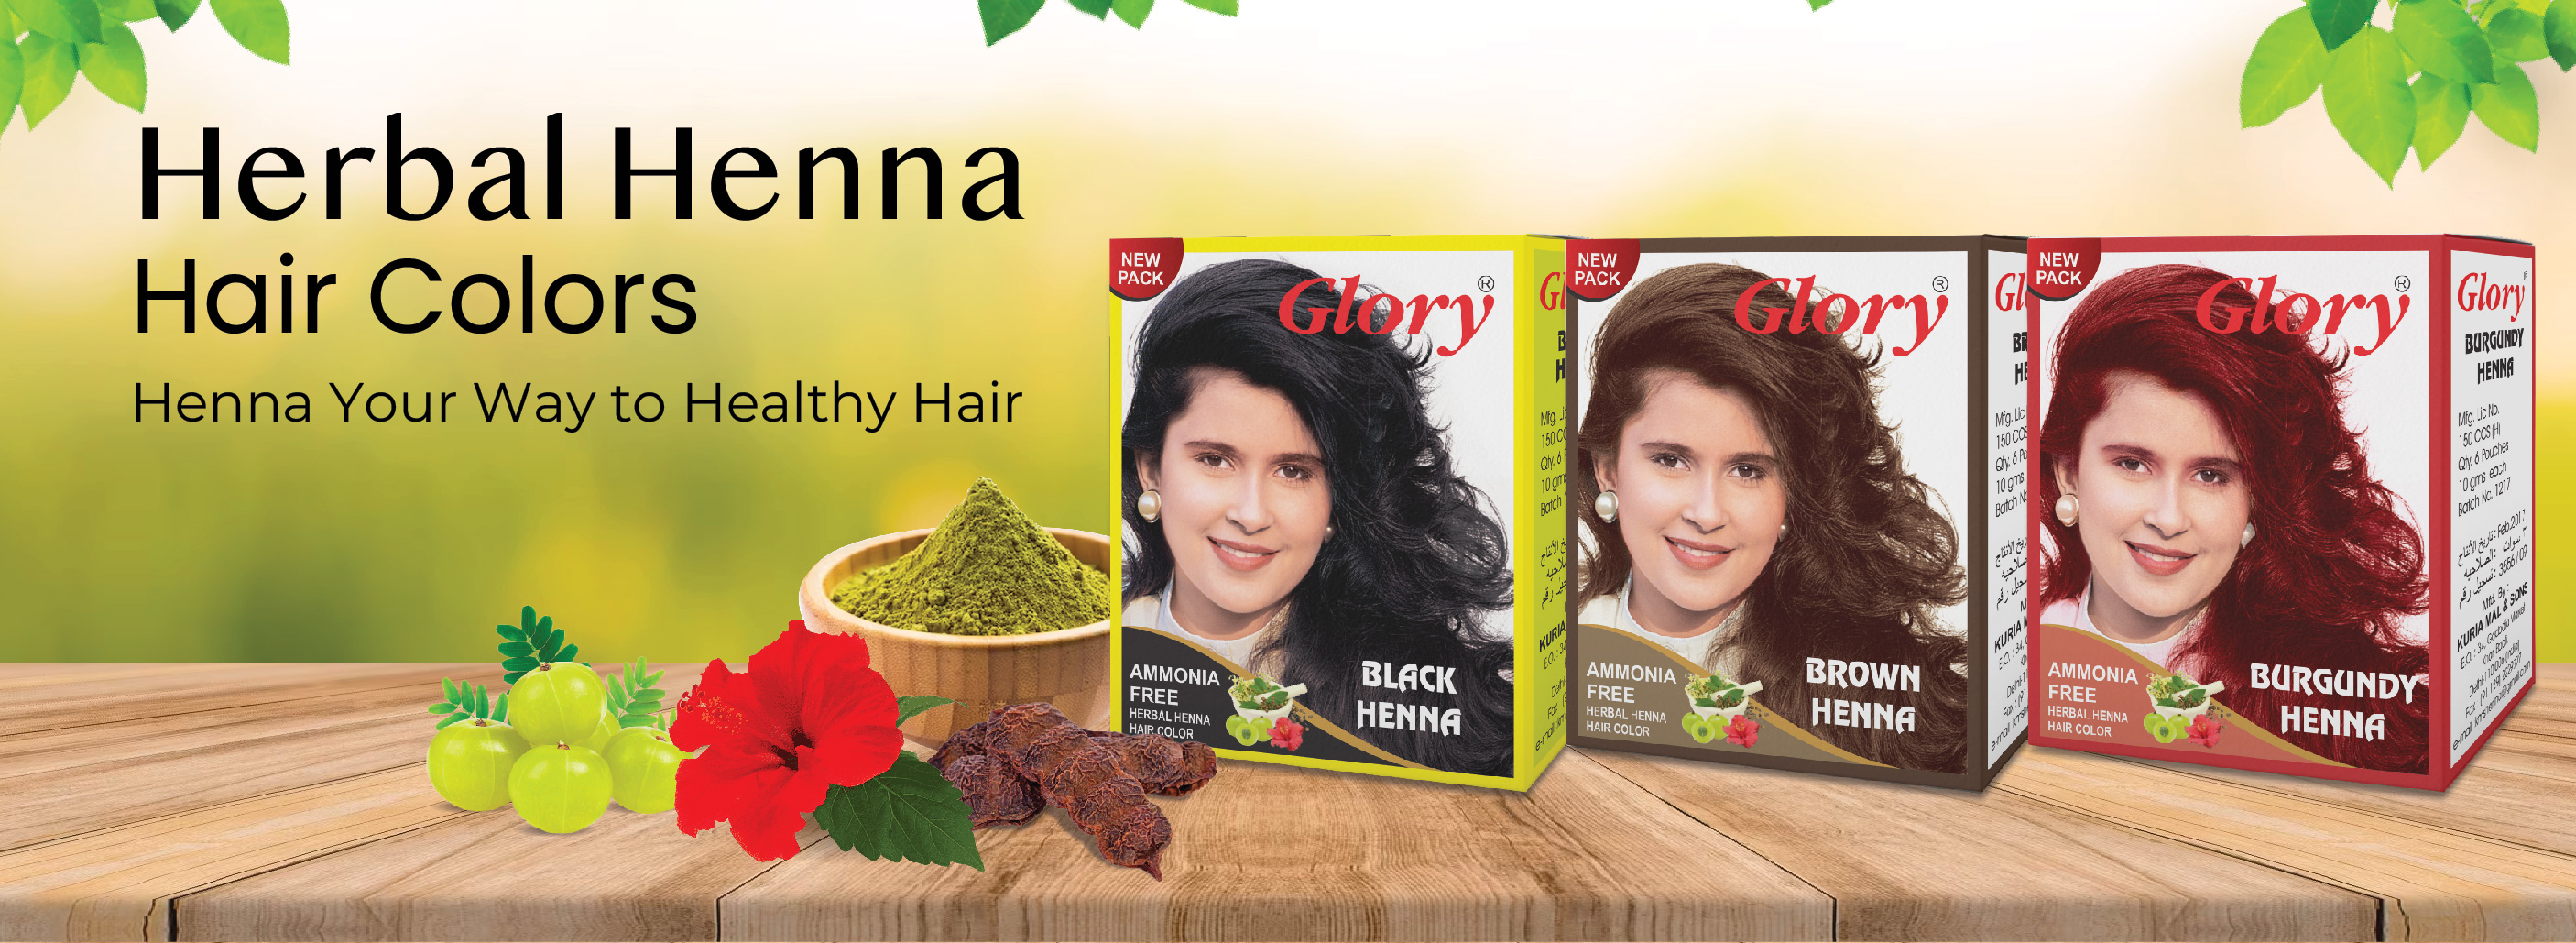 Henna Hair Color Manufacturer | Henna Hair Color Manufacturer in India